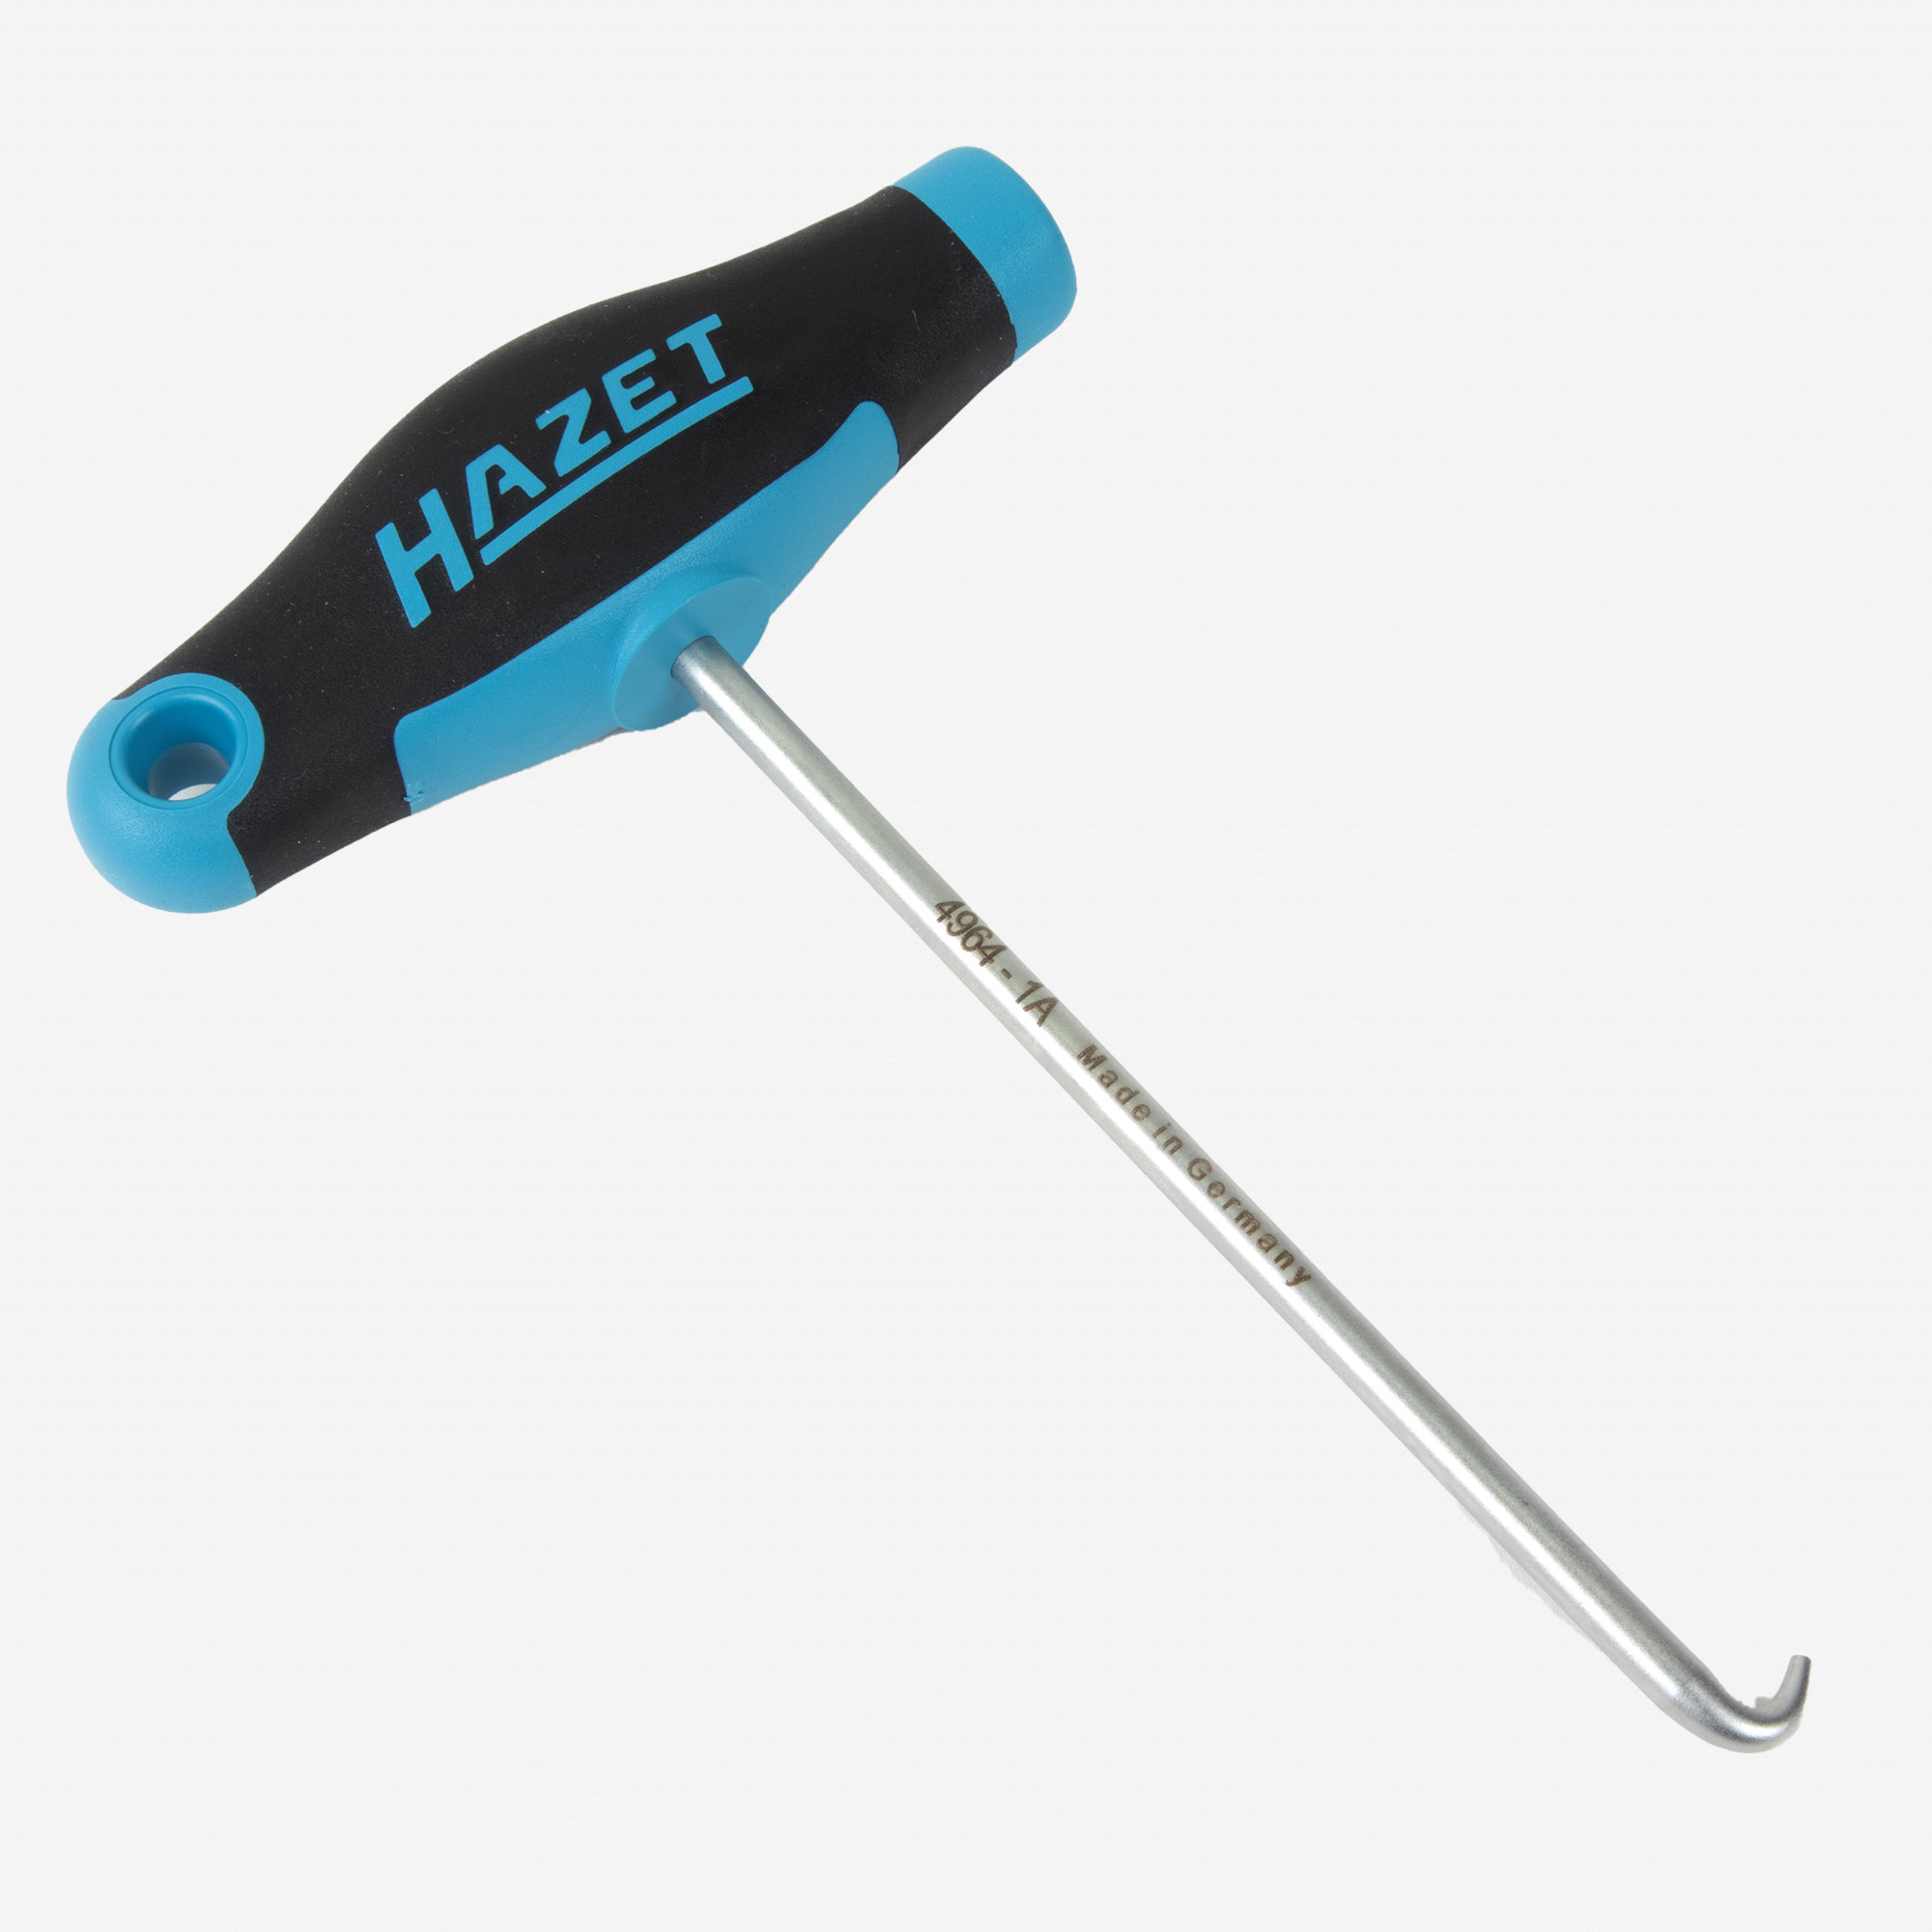 Hazet 4964-1A T-handle Assembly Tool